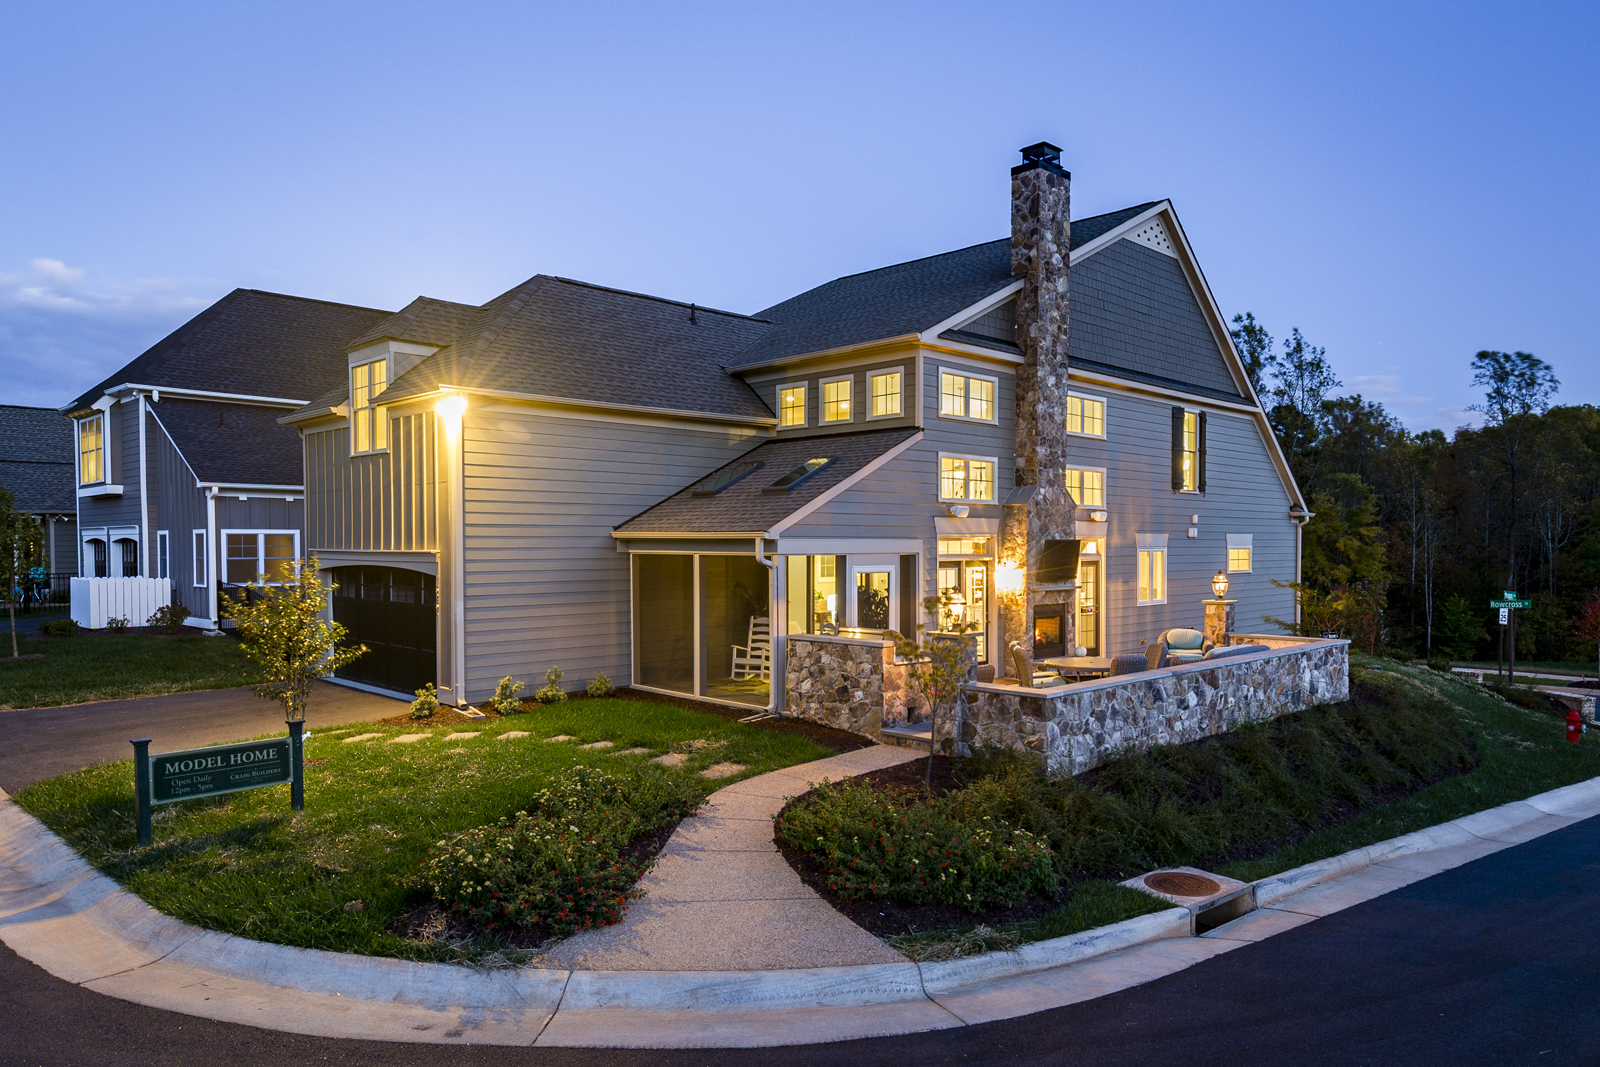 Exterior of Craig Builders model home in Old Trail Village in the evening.